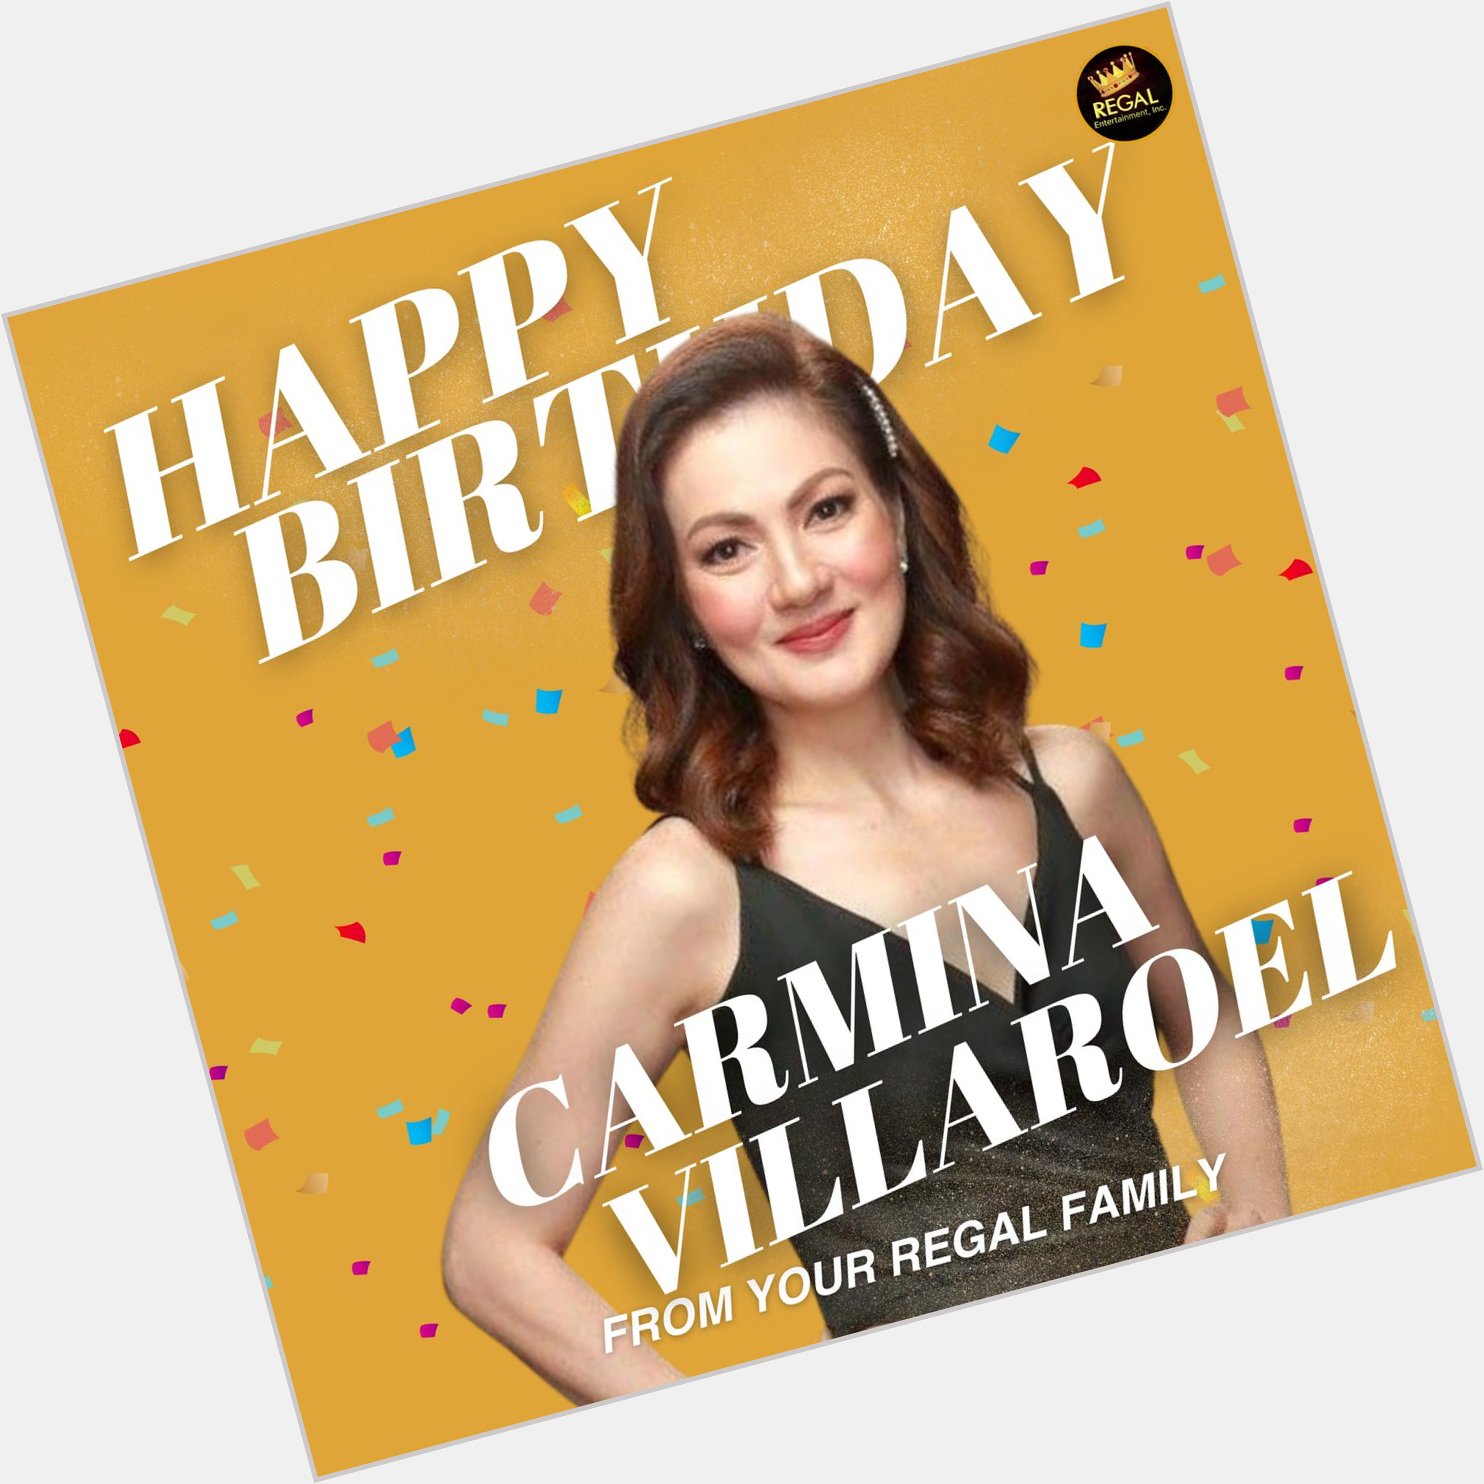 Happy Birthday Carmina Villaroel! We wish you all the best in life! From your Regal Family!  